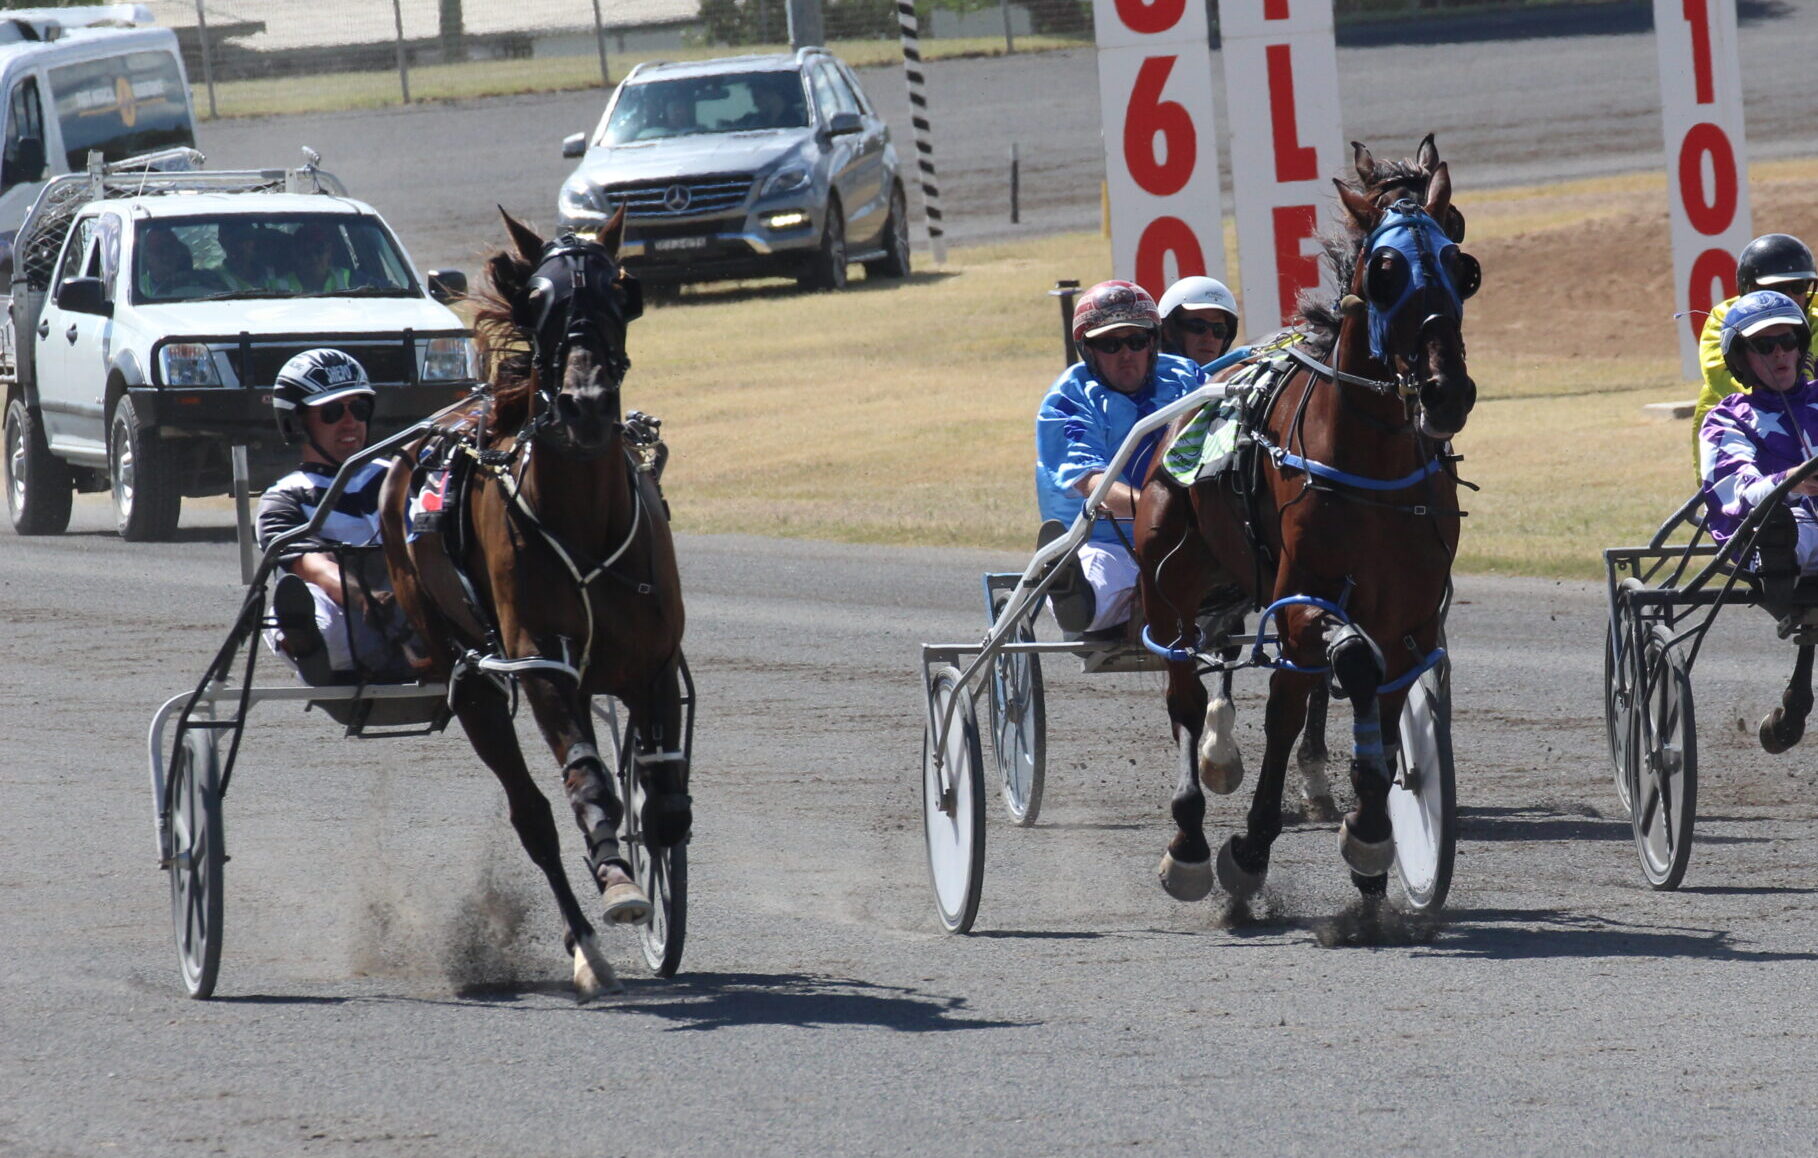 Local pacer Montana Nights races to two podium finishes in Tamworth